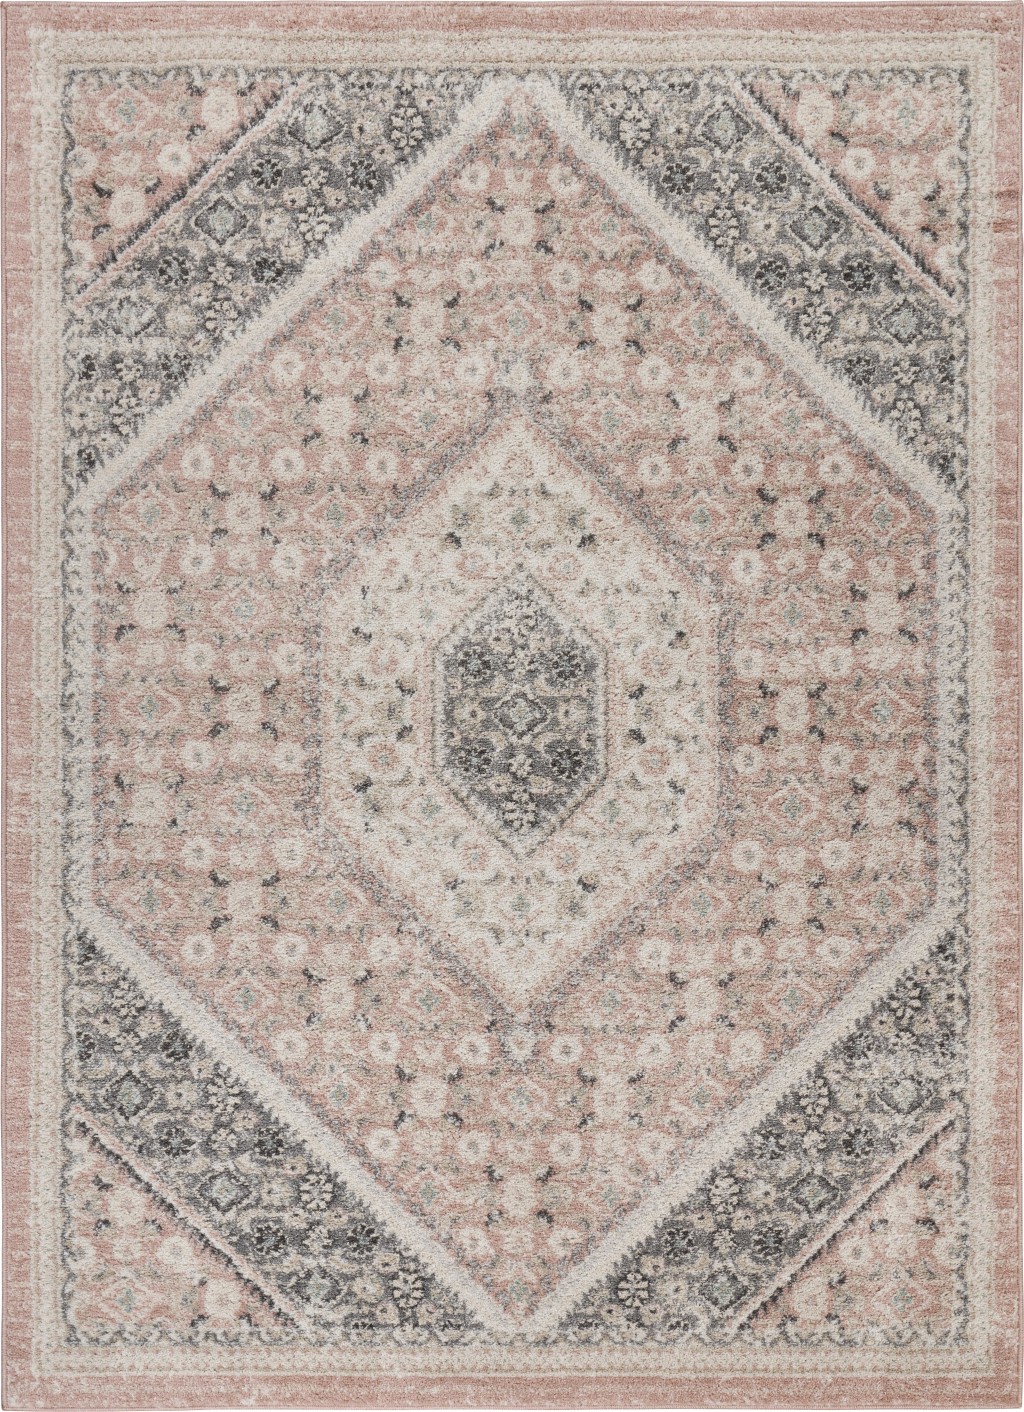 8’ x 10’ Gray and Soft Pink Traditional Area Rug-395601-1